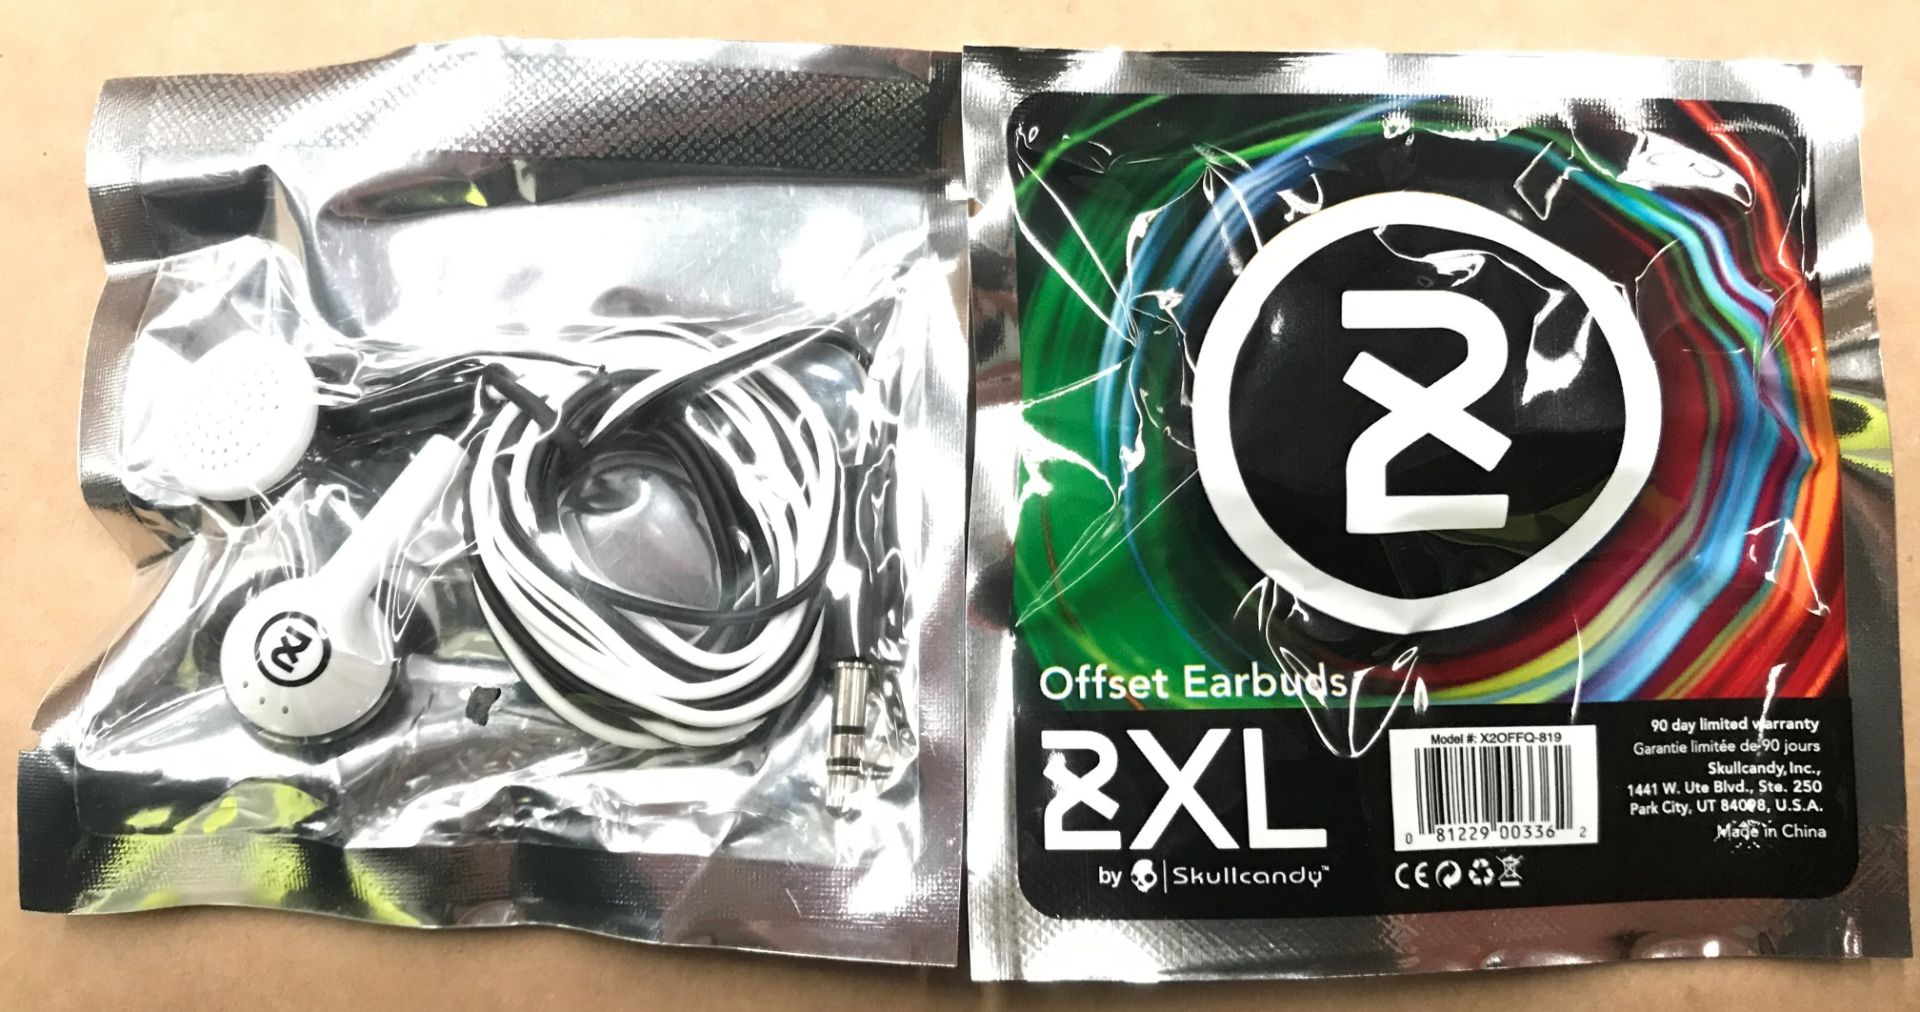 500 x 2XL Offset Earbuds/headphones by Skullcandy (20 inner bags) - black and white - Image 2 of 2